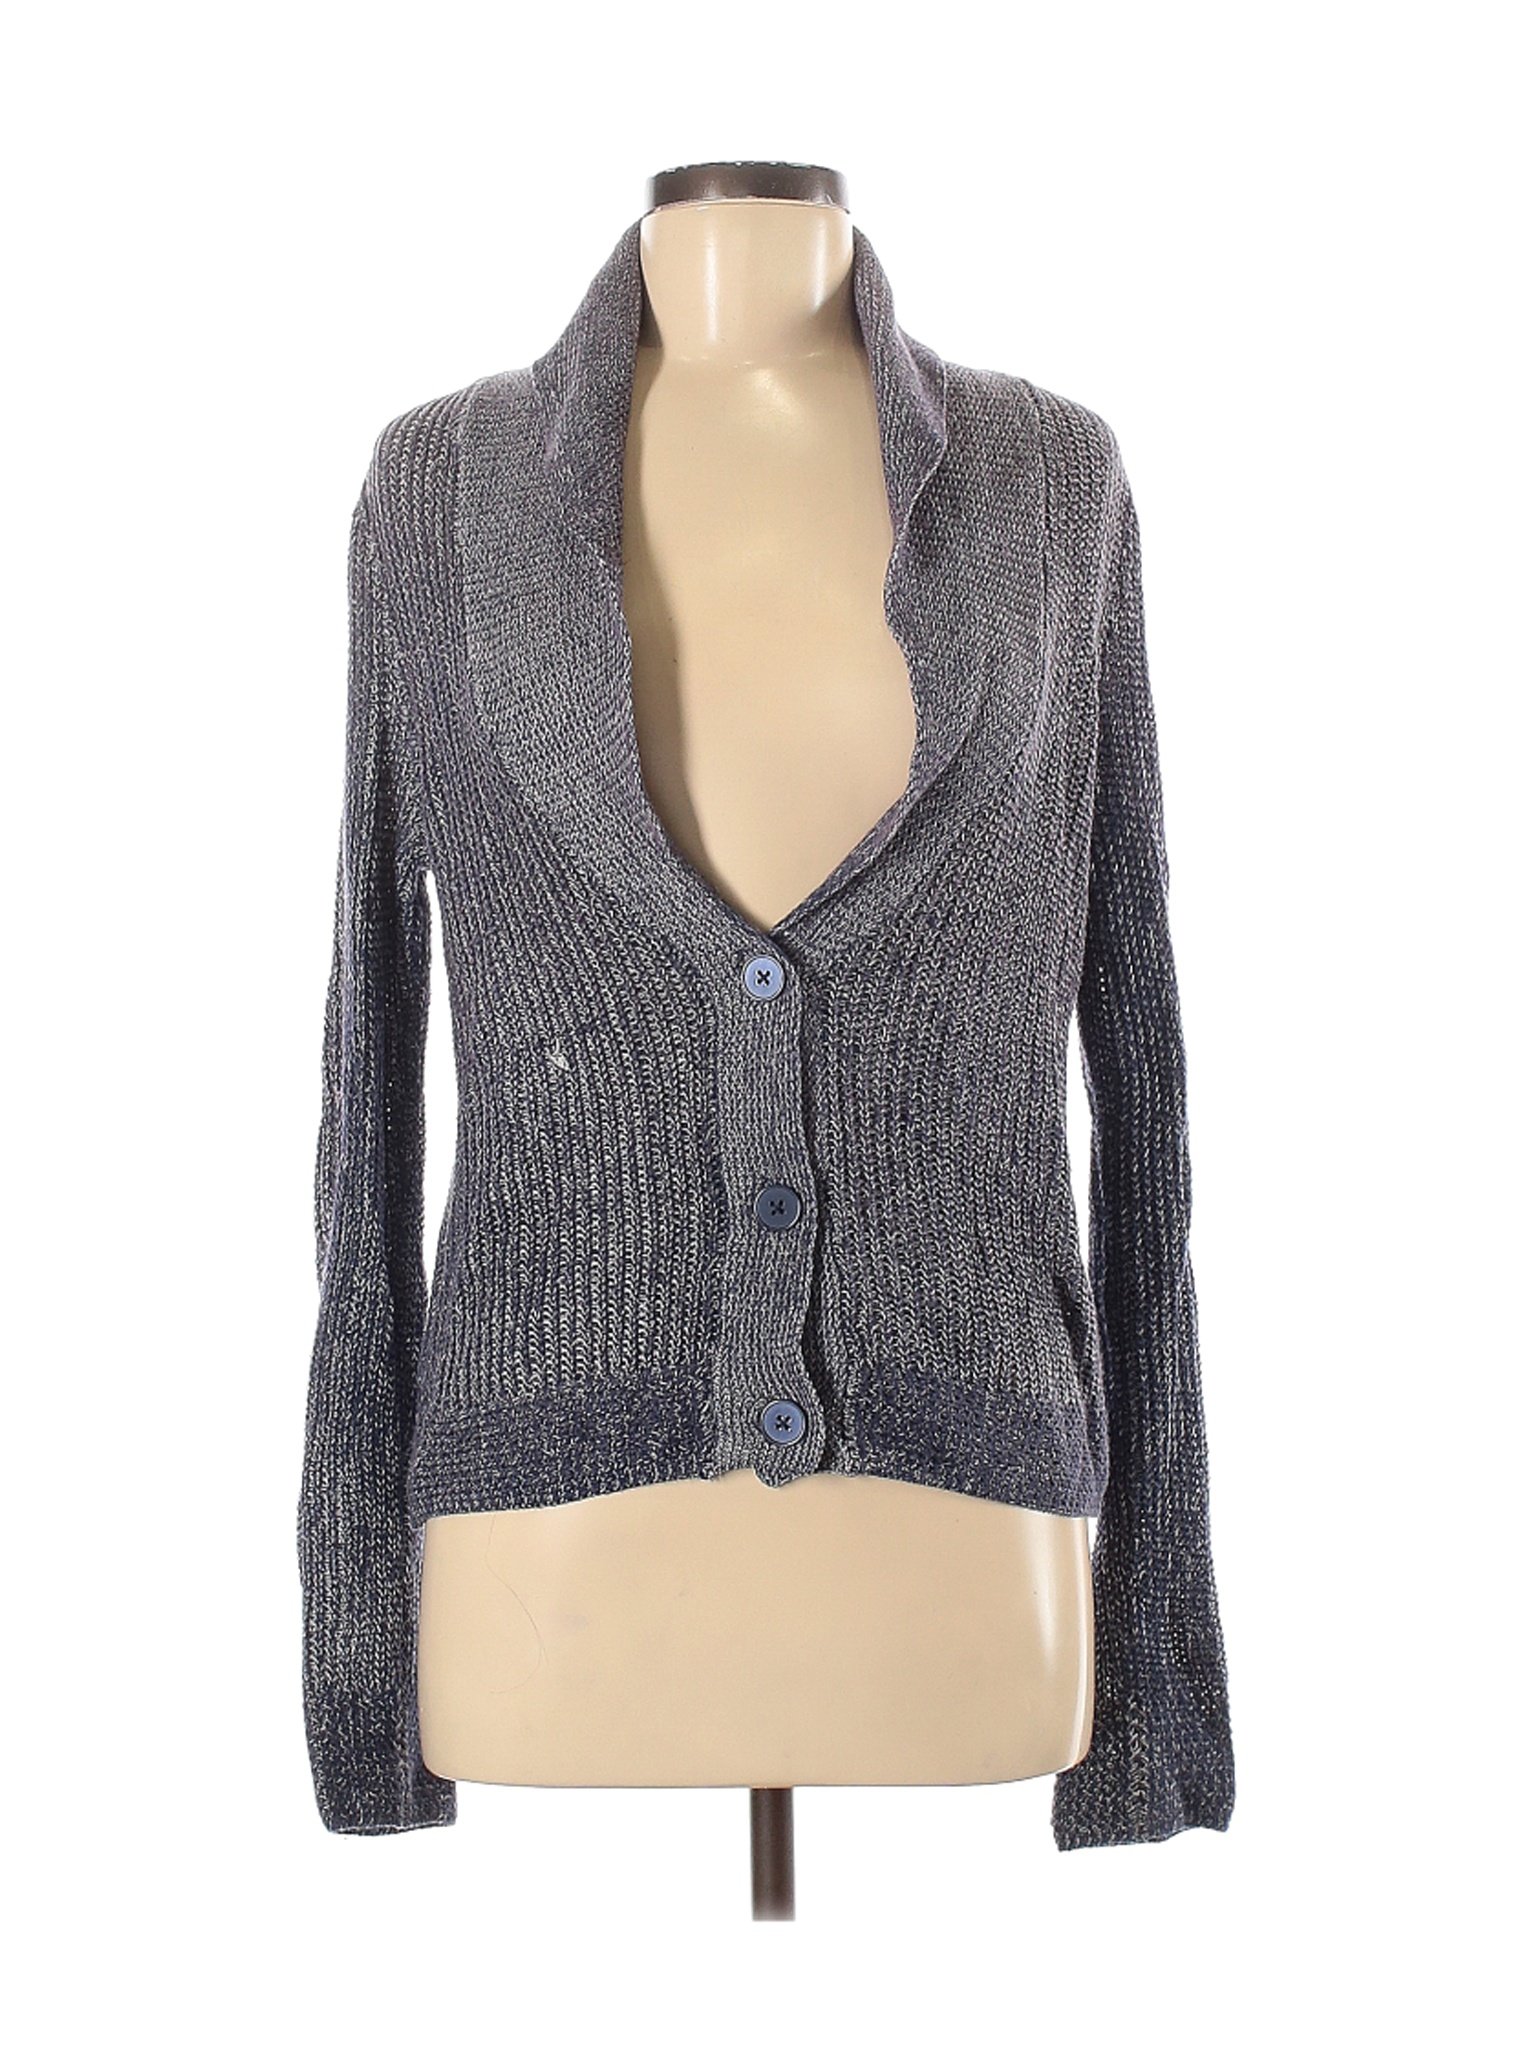 American Eagle Outfitters Women Gray Cardigan M | eBay